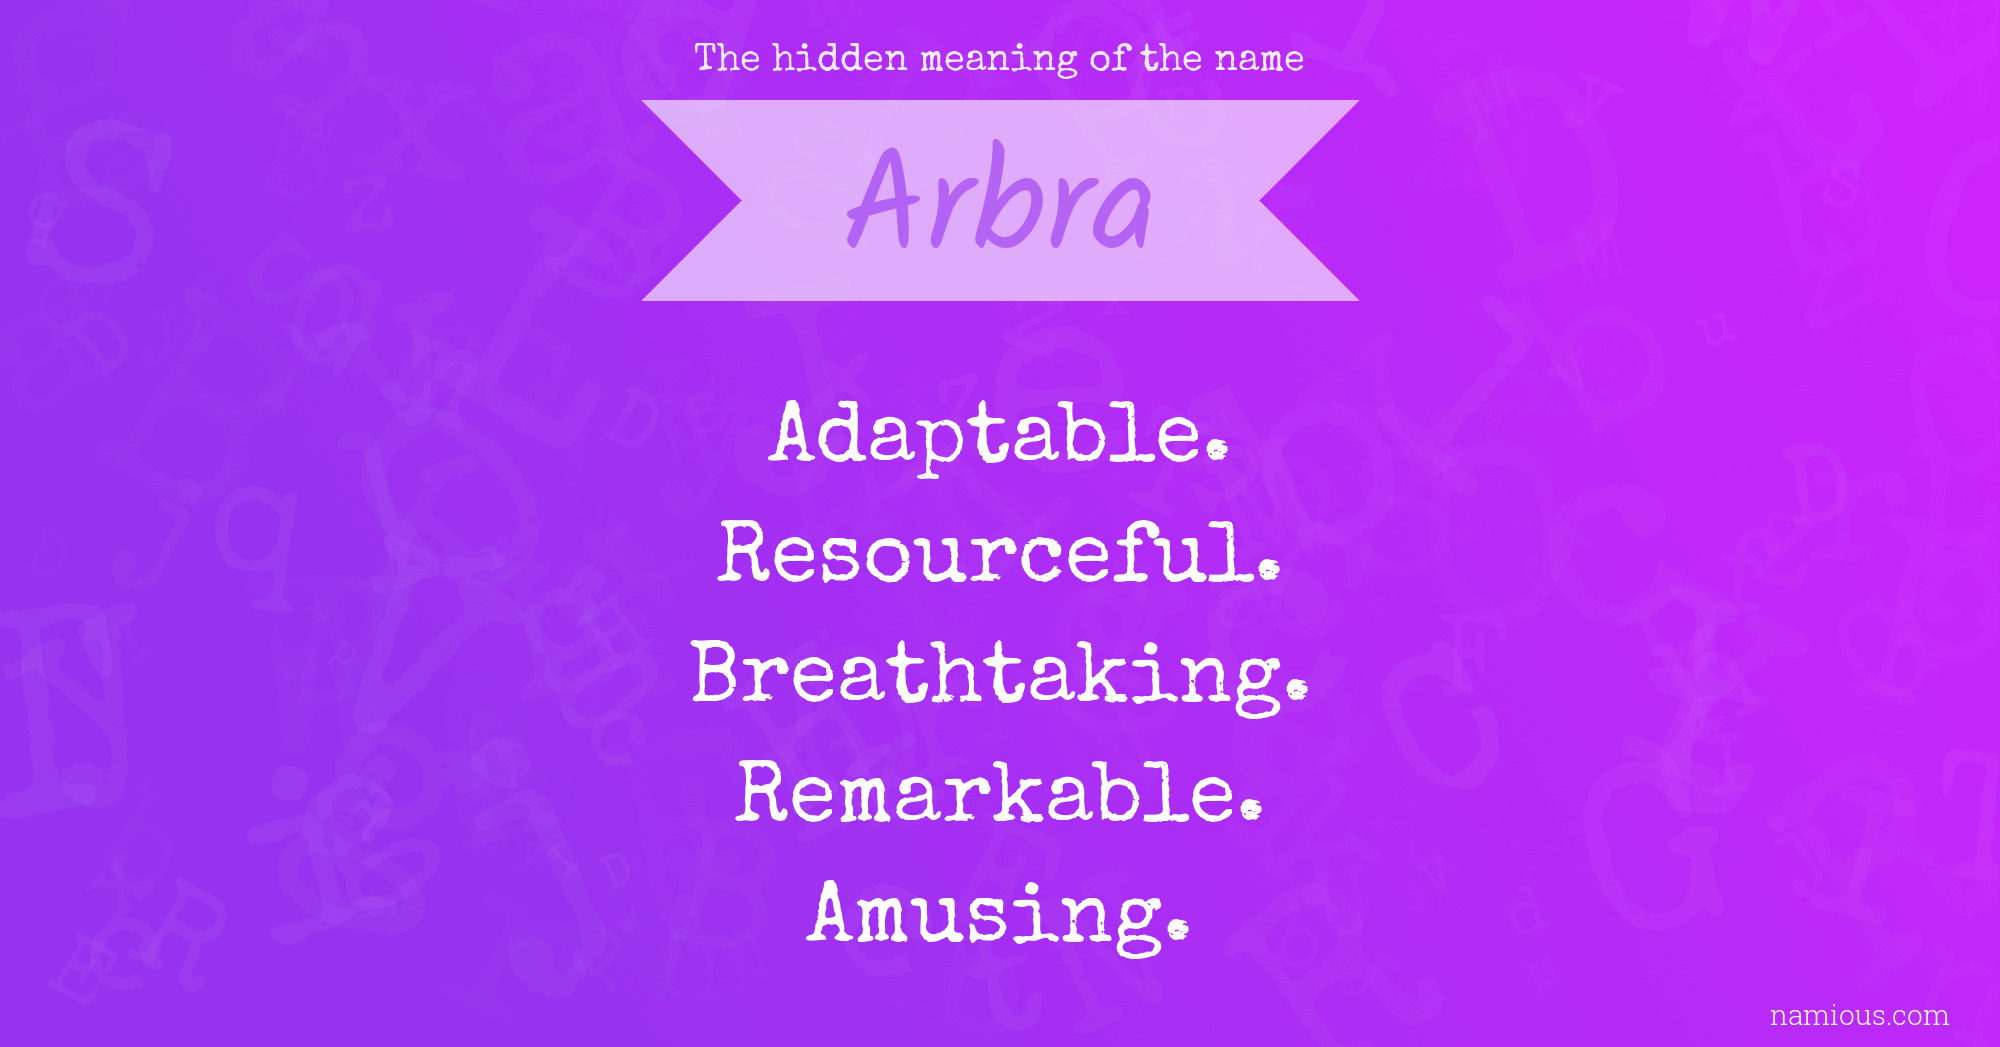 The hidden meaning of the name Arbra